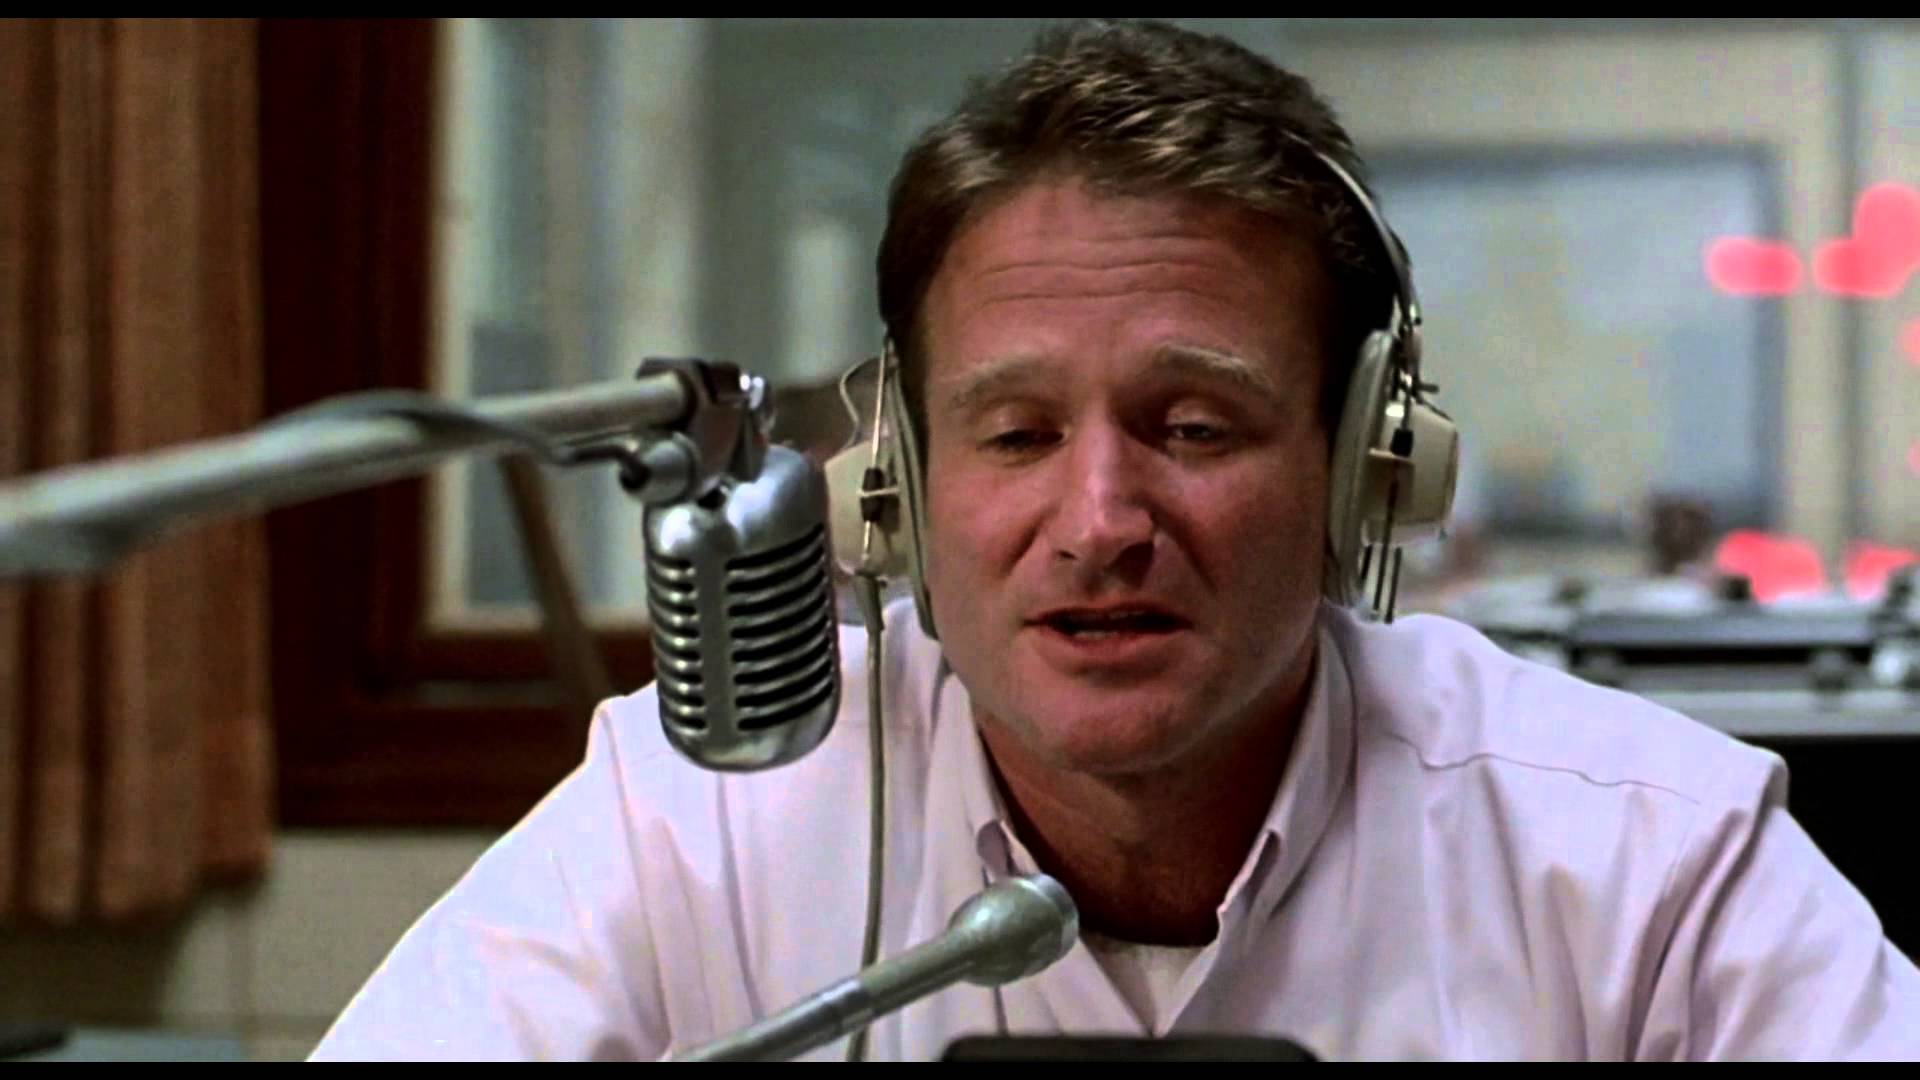 HD Quality Wallpaper | Collection: Movie, 1920x1080 Good Morning Vietnam